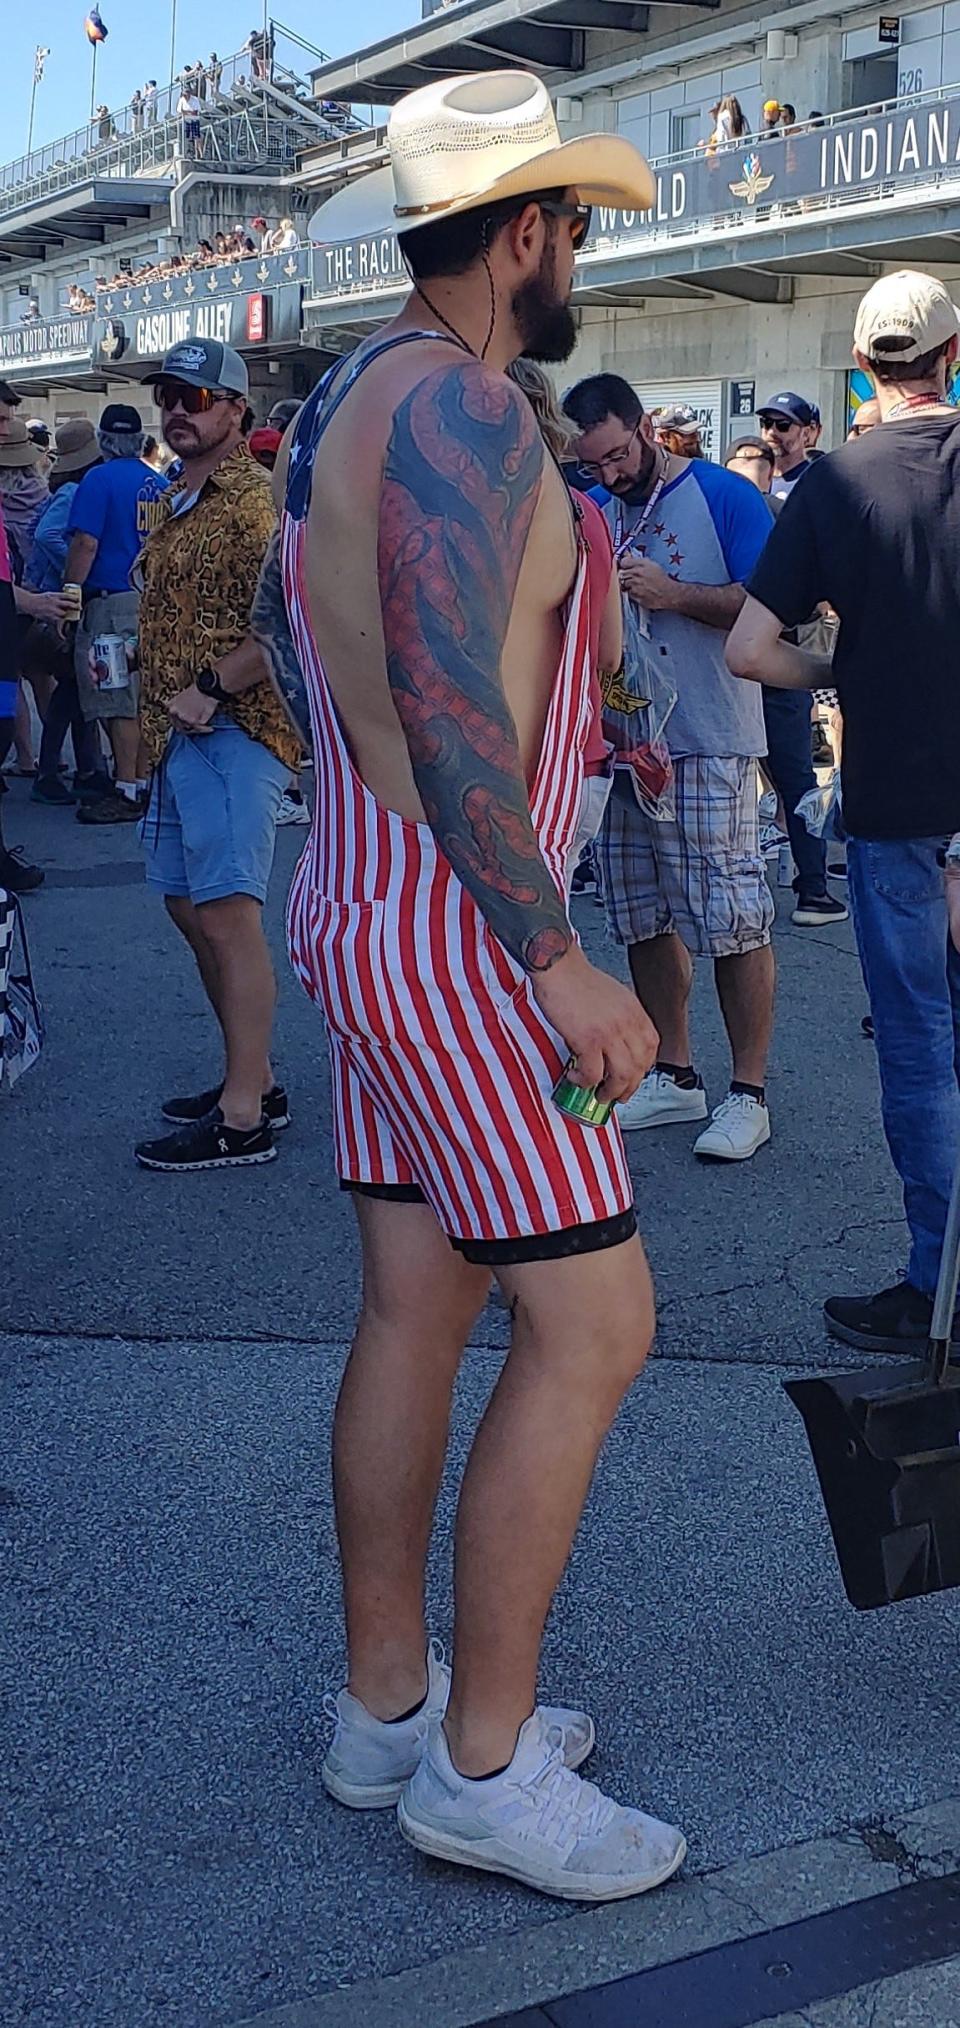 The stars and stripes are a wardrobe staple for many fans of the Indy 500, where the Memorial Day remembrances are a big part of the tradition.